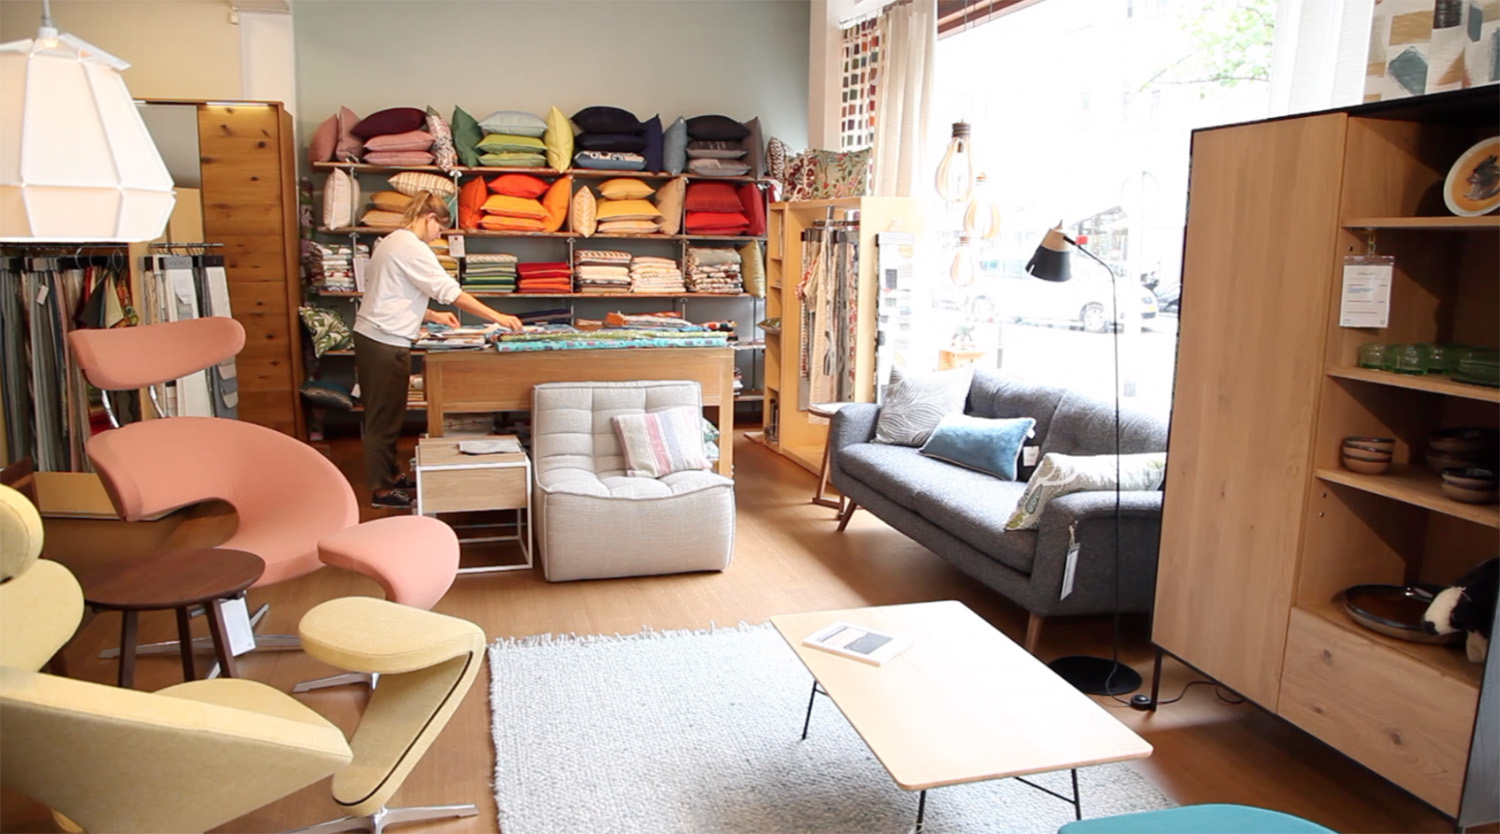 At 'Inside' you can find everything for... inside your home! From sustainable fabrics to furniture made from local wood.